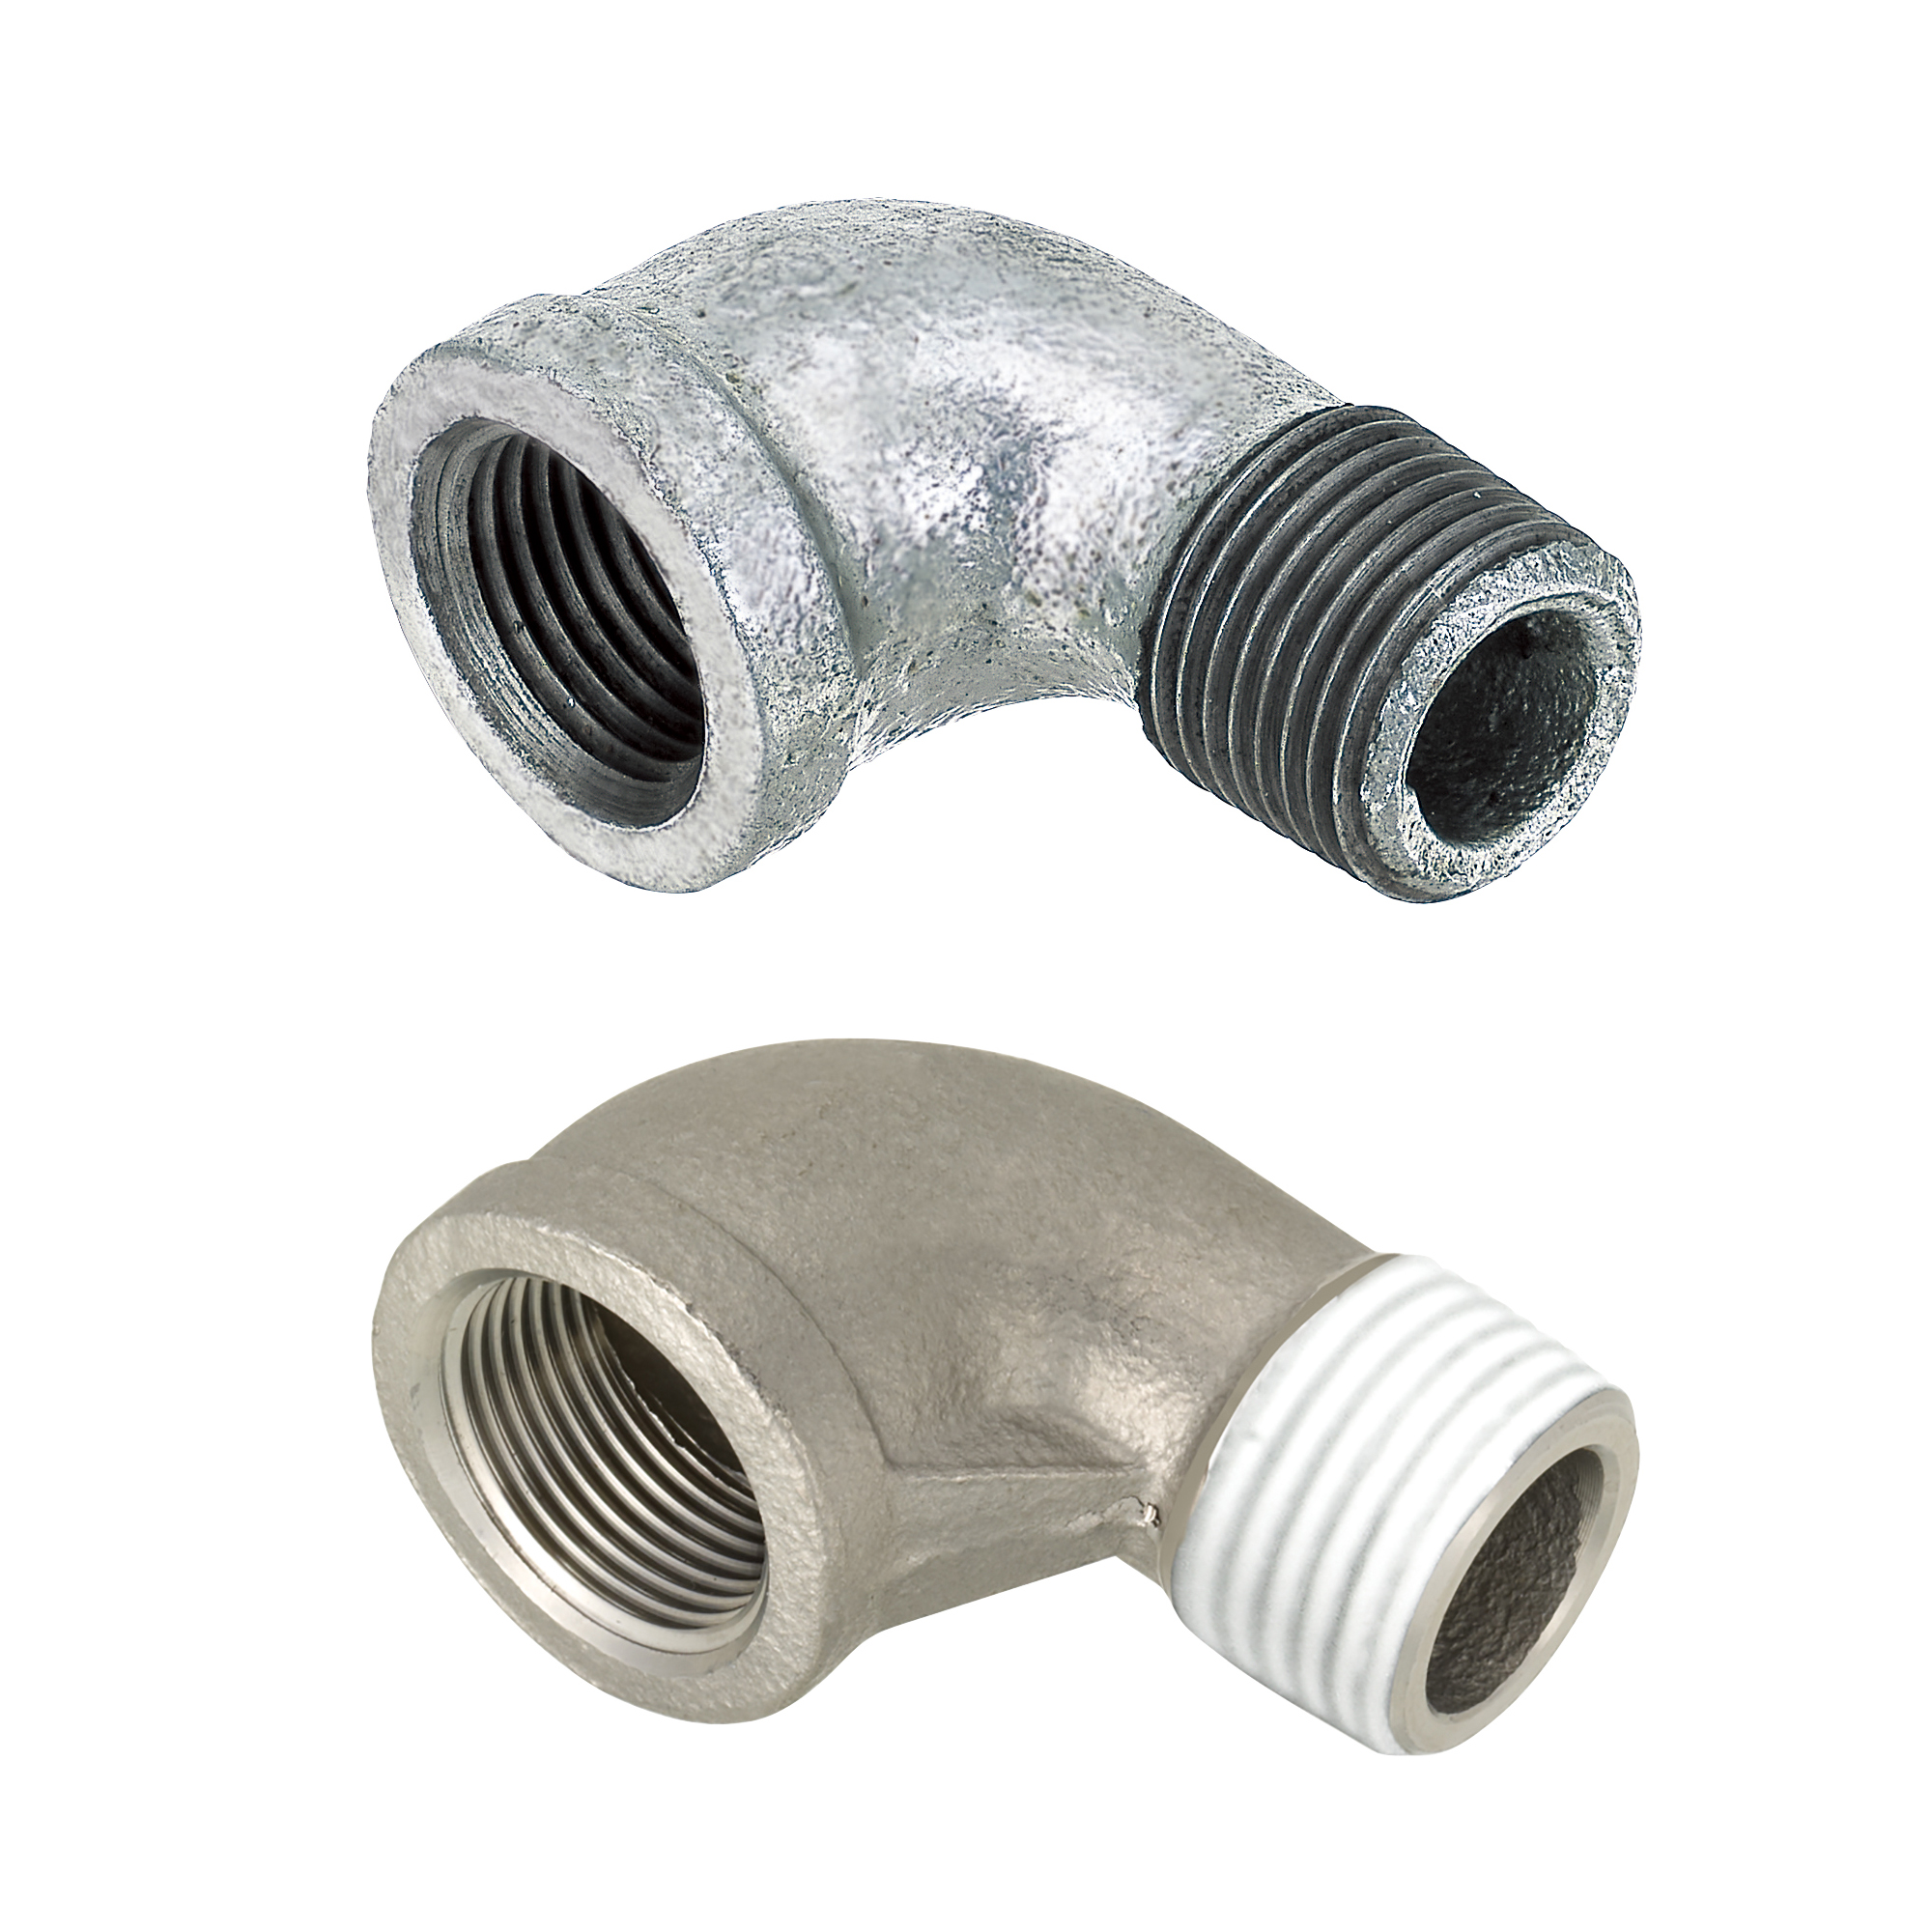 Low Pressure Fittings/90 Deg. Elbow/Threaded and Tapped (SUCEL25A) 